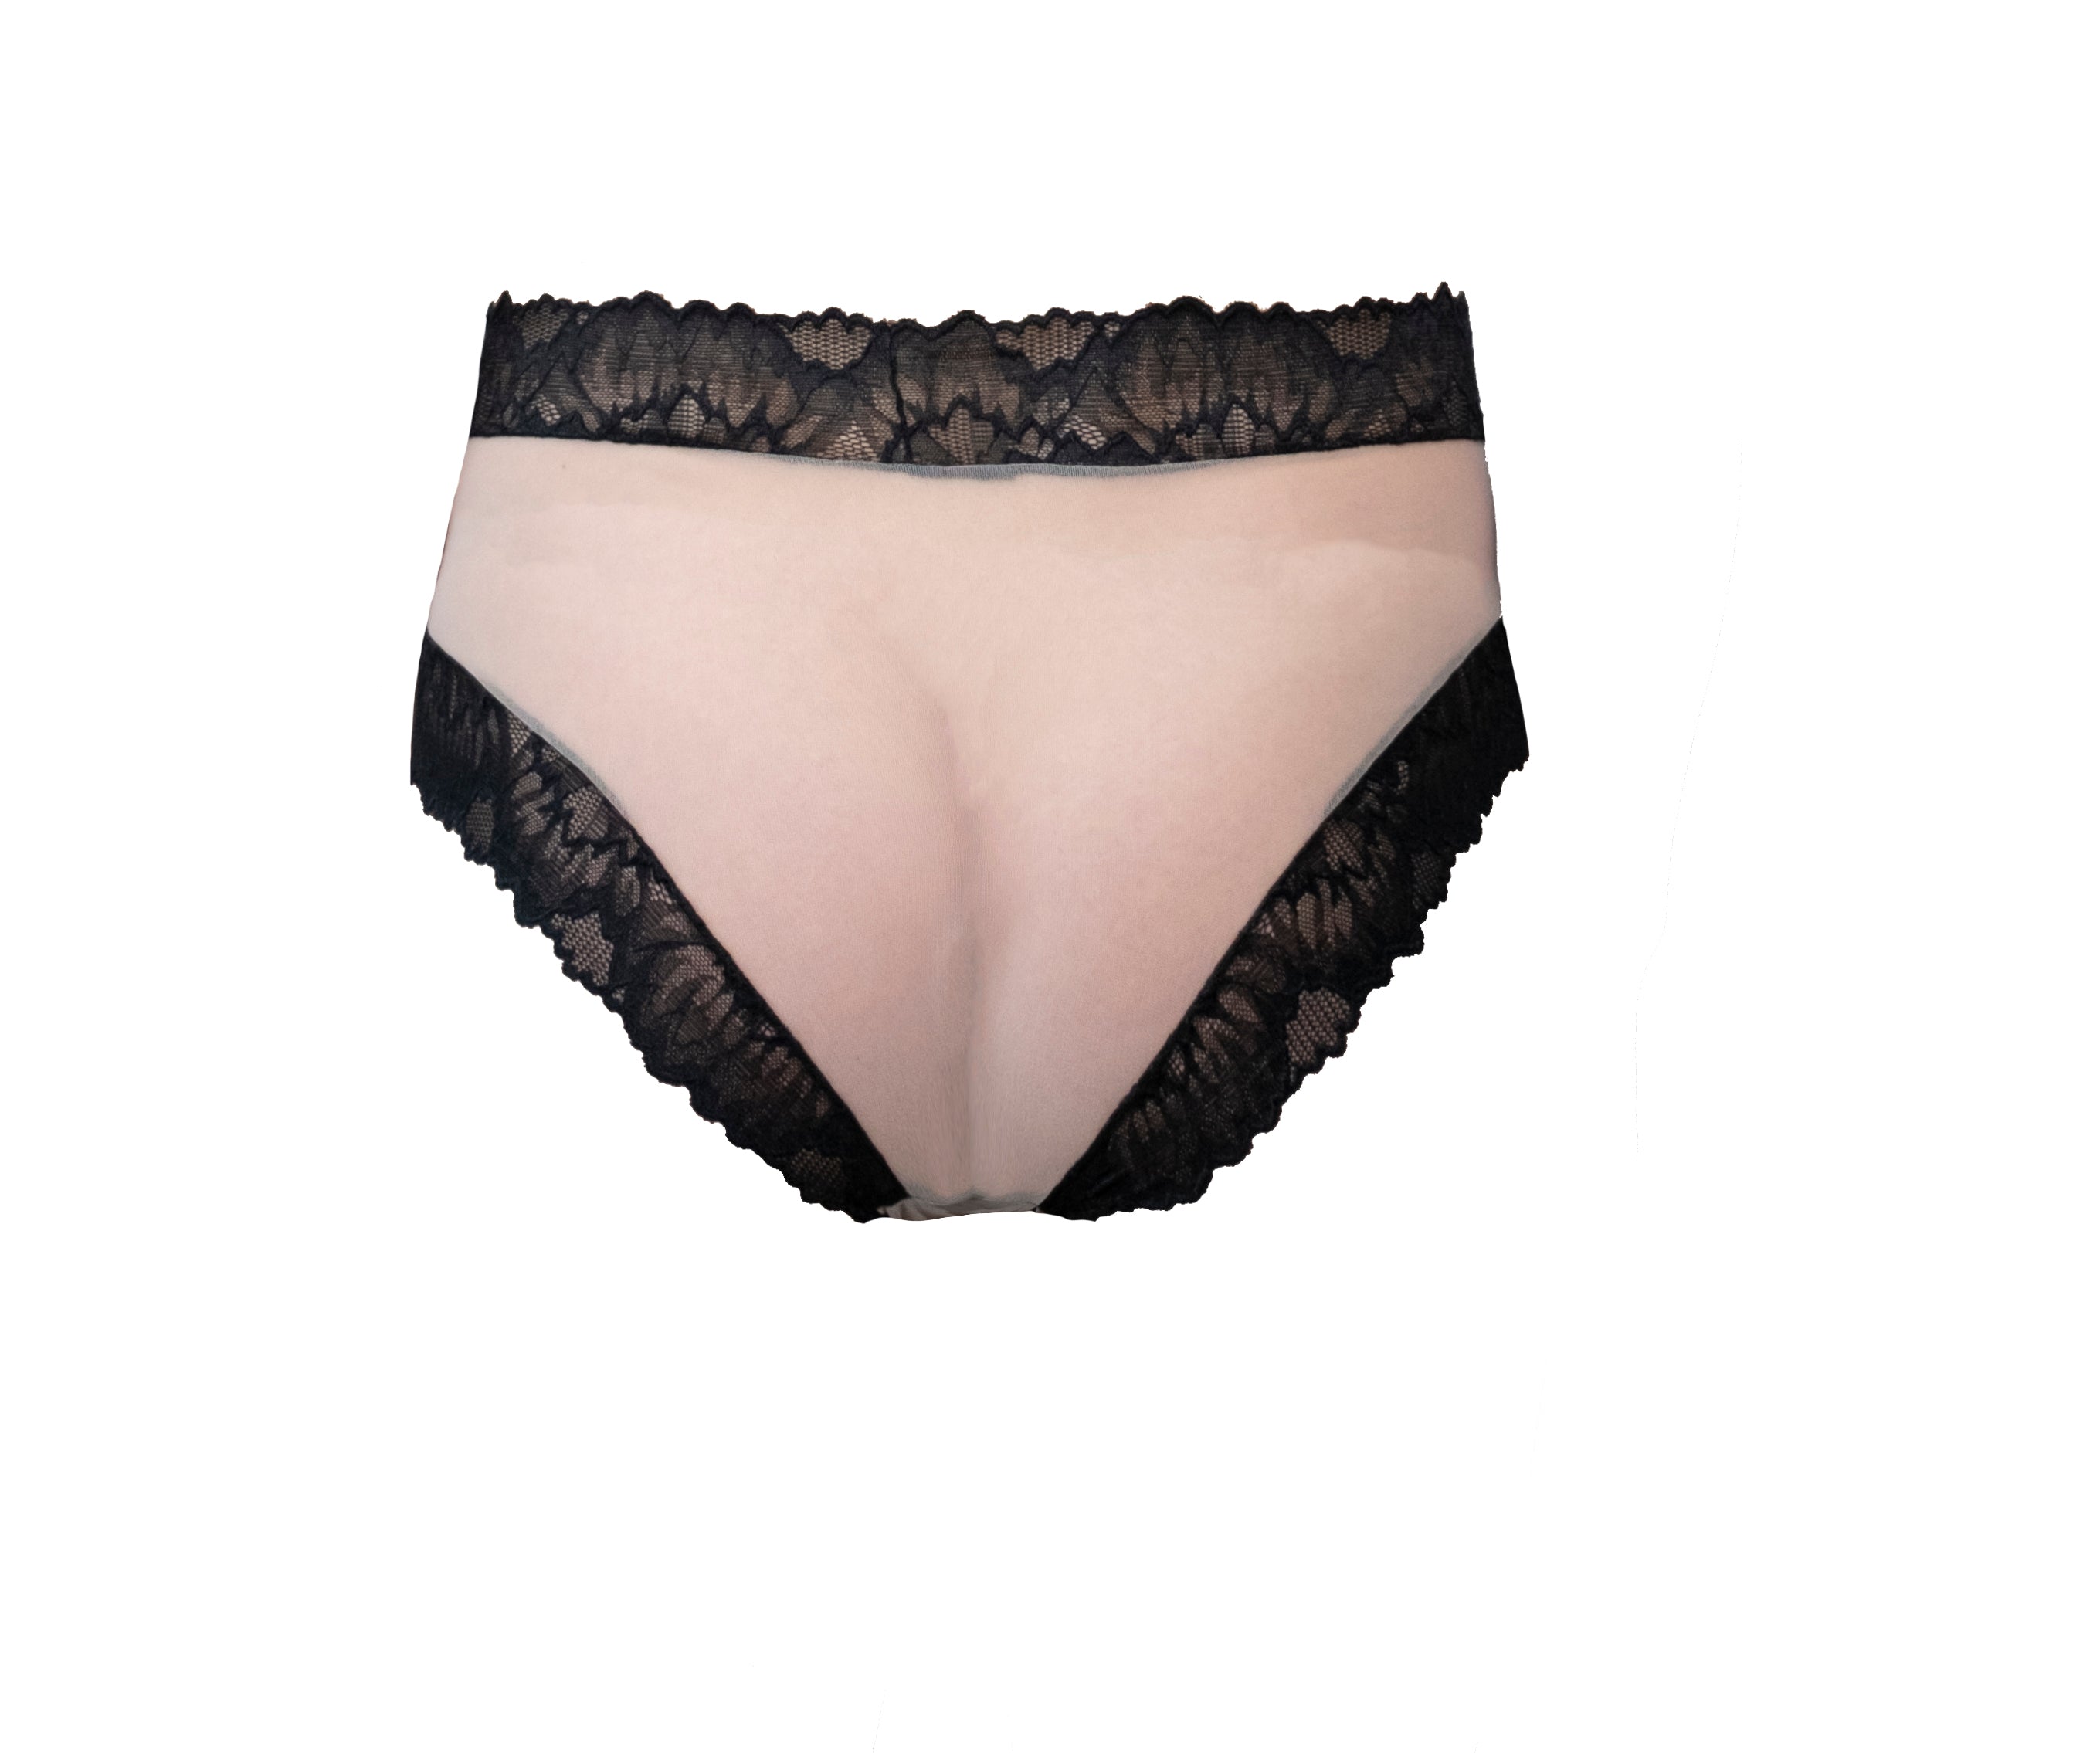 Our most comfortable panty ever. Elastic-free geometric sparkle lace and sheer stretch tulle compose this mid-rise panty, lined in 100% cotton.